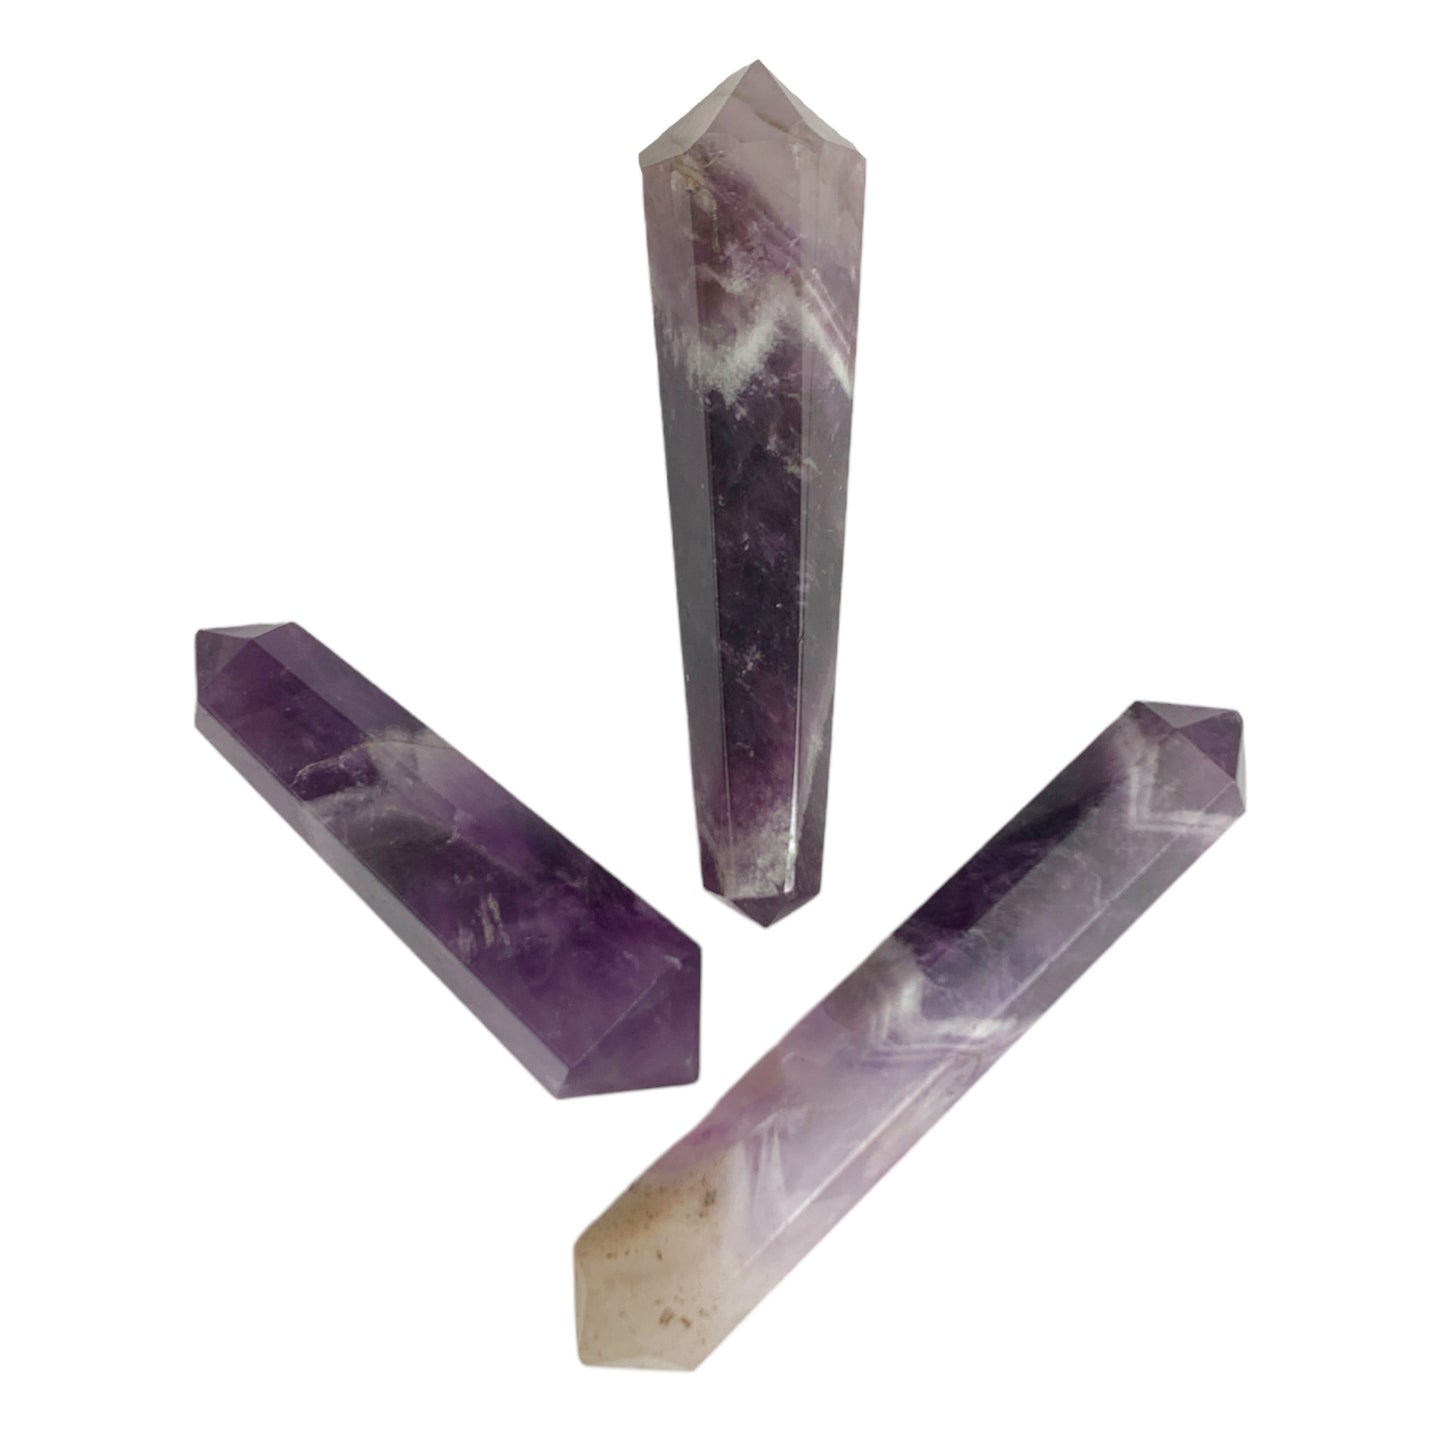 Amethyst - 35-40mm -Double Terminated Pencil Points - 6 Grams - India - order in 5's